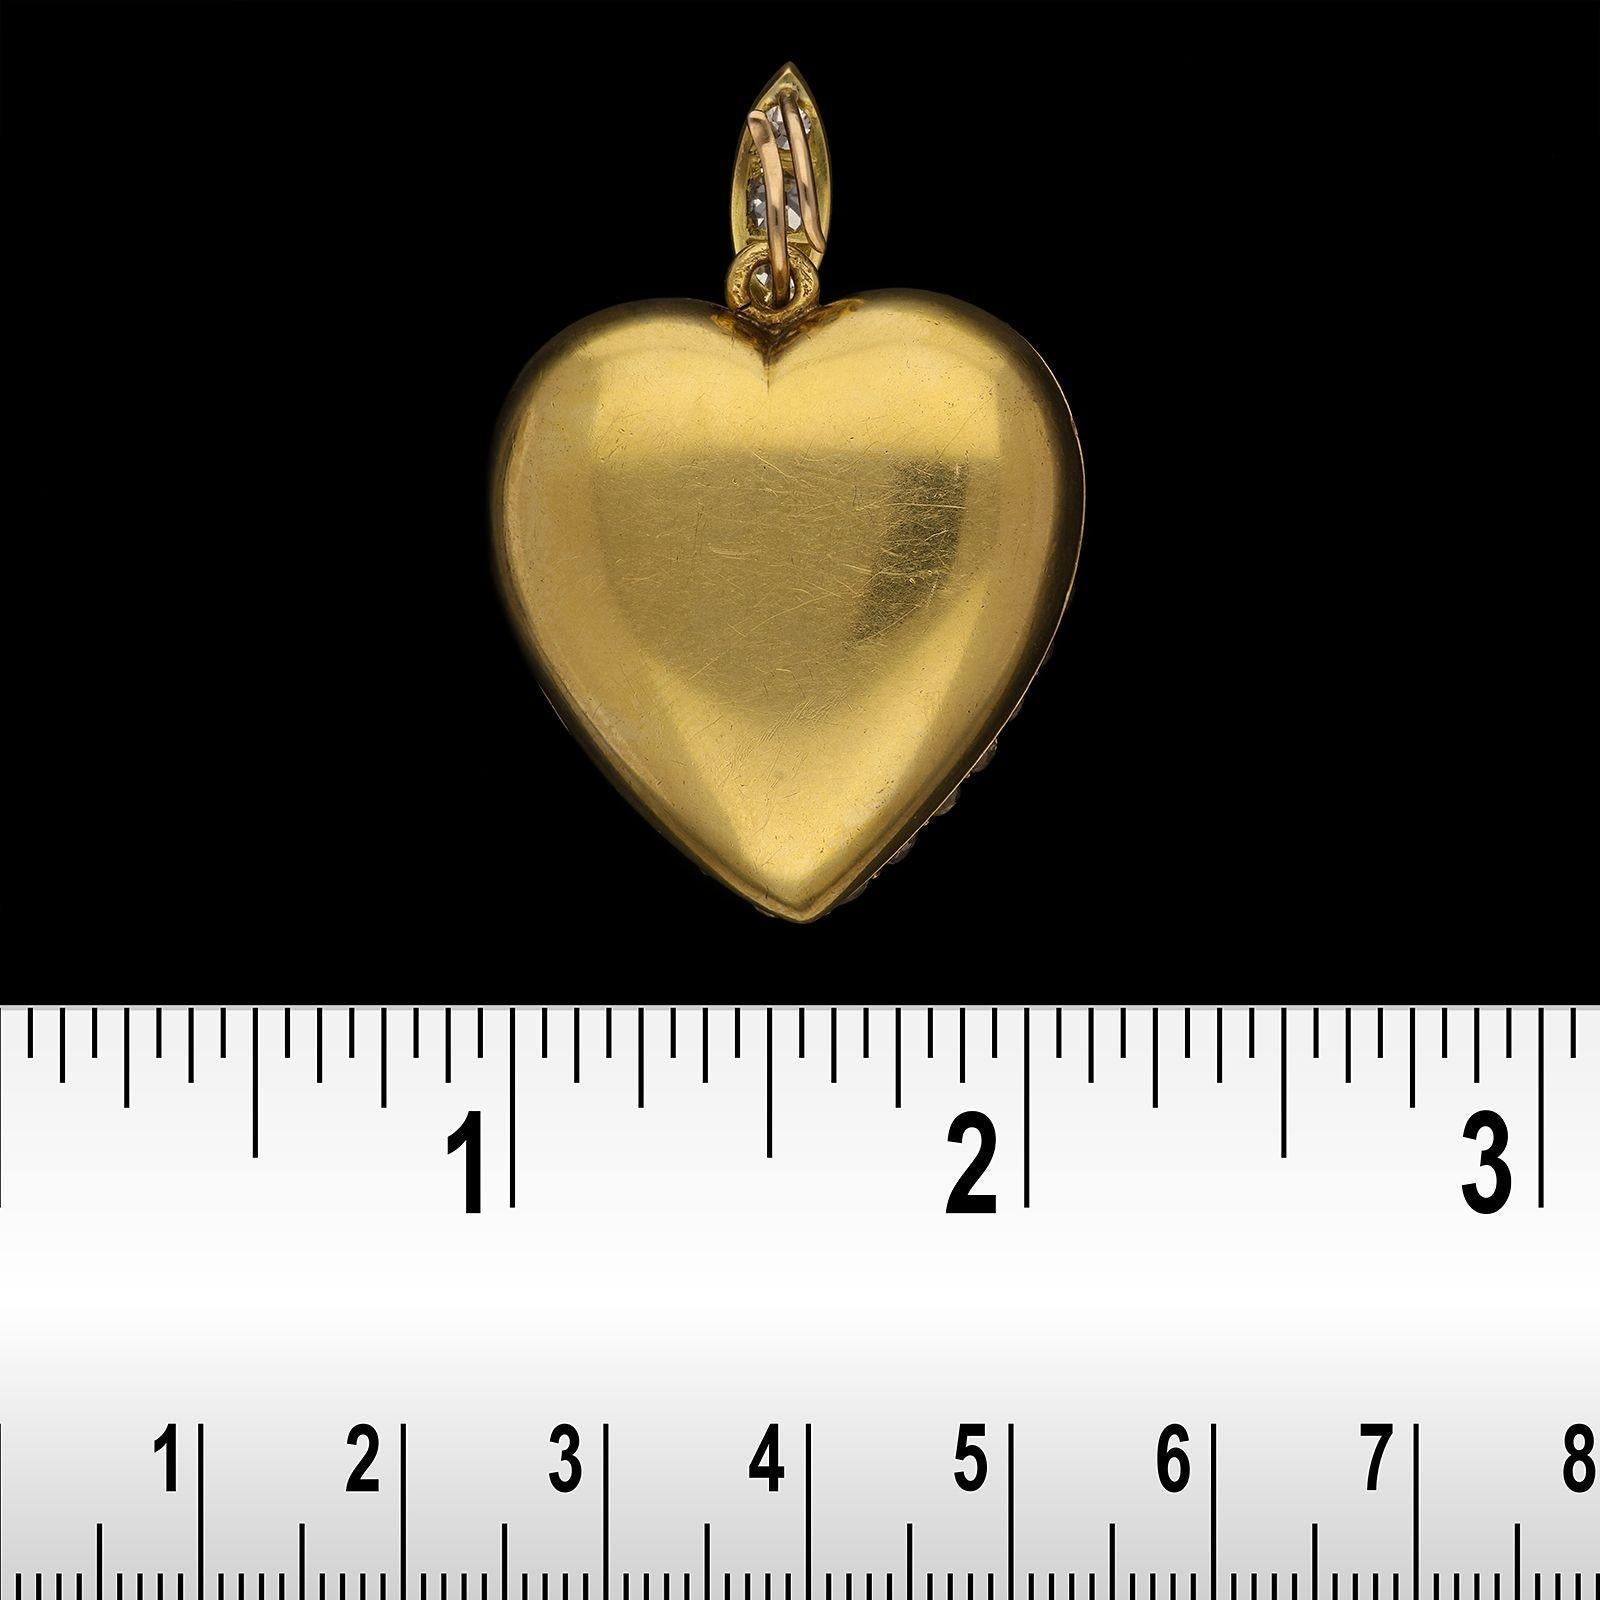 Victorian Stunning Pavé Diamond Heart Shape Locket Pendant 4 Leaf Clover Inside In Good Condition For Sale In London, GB